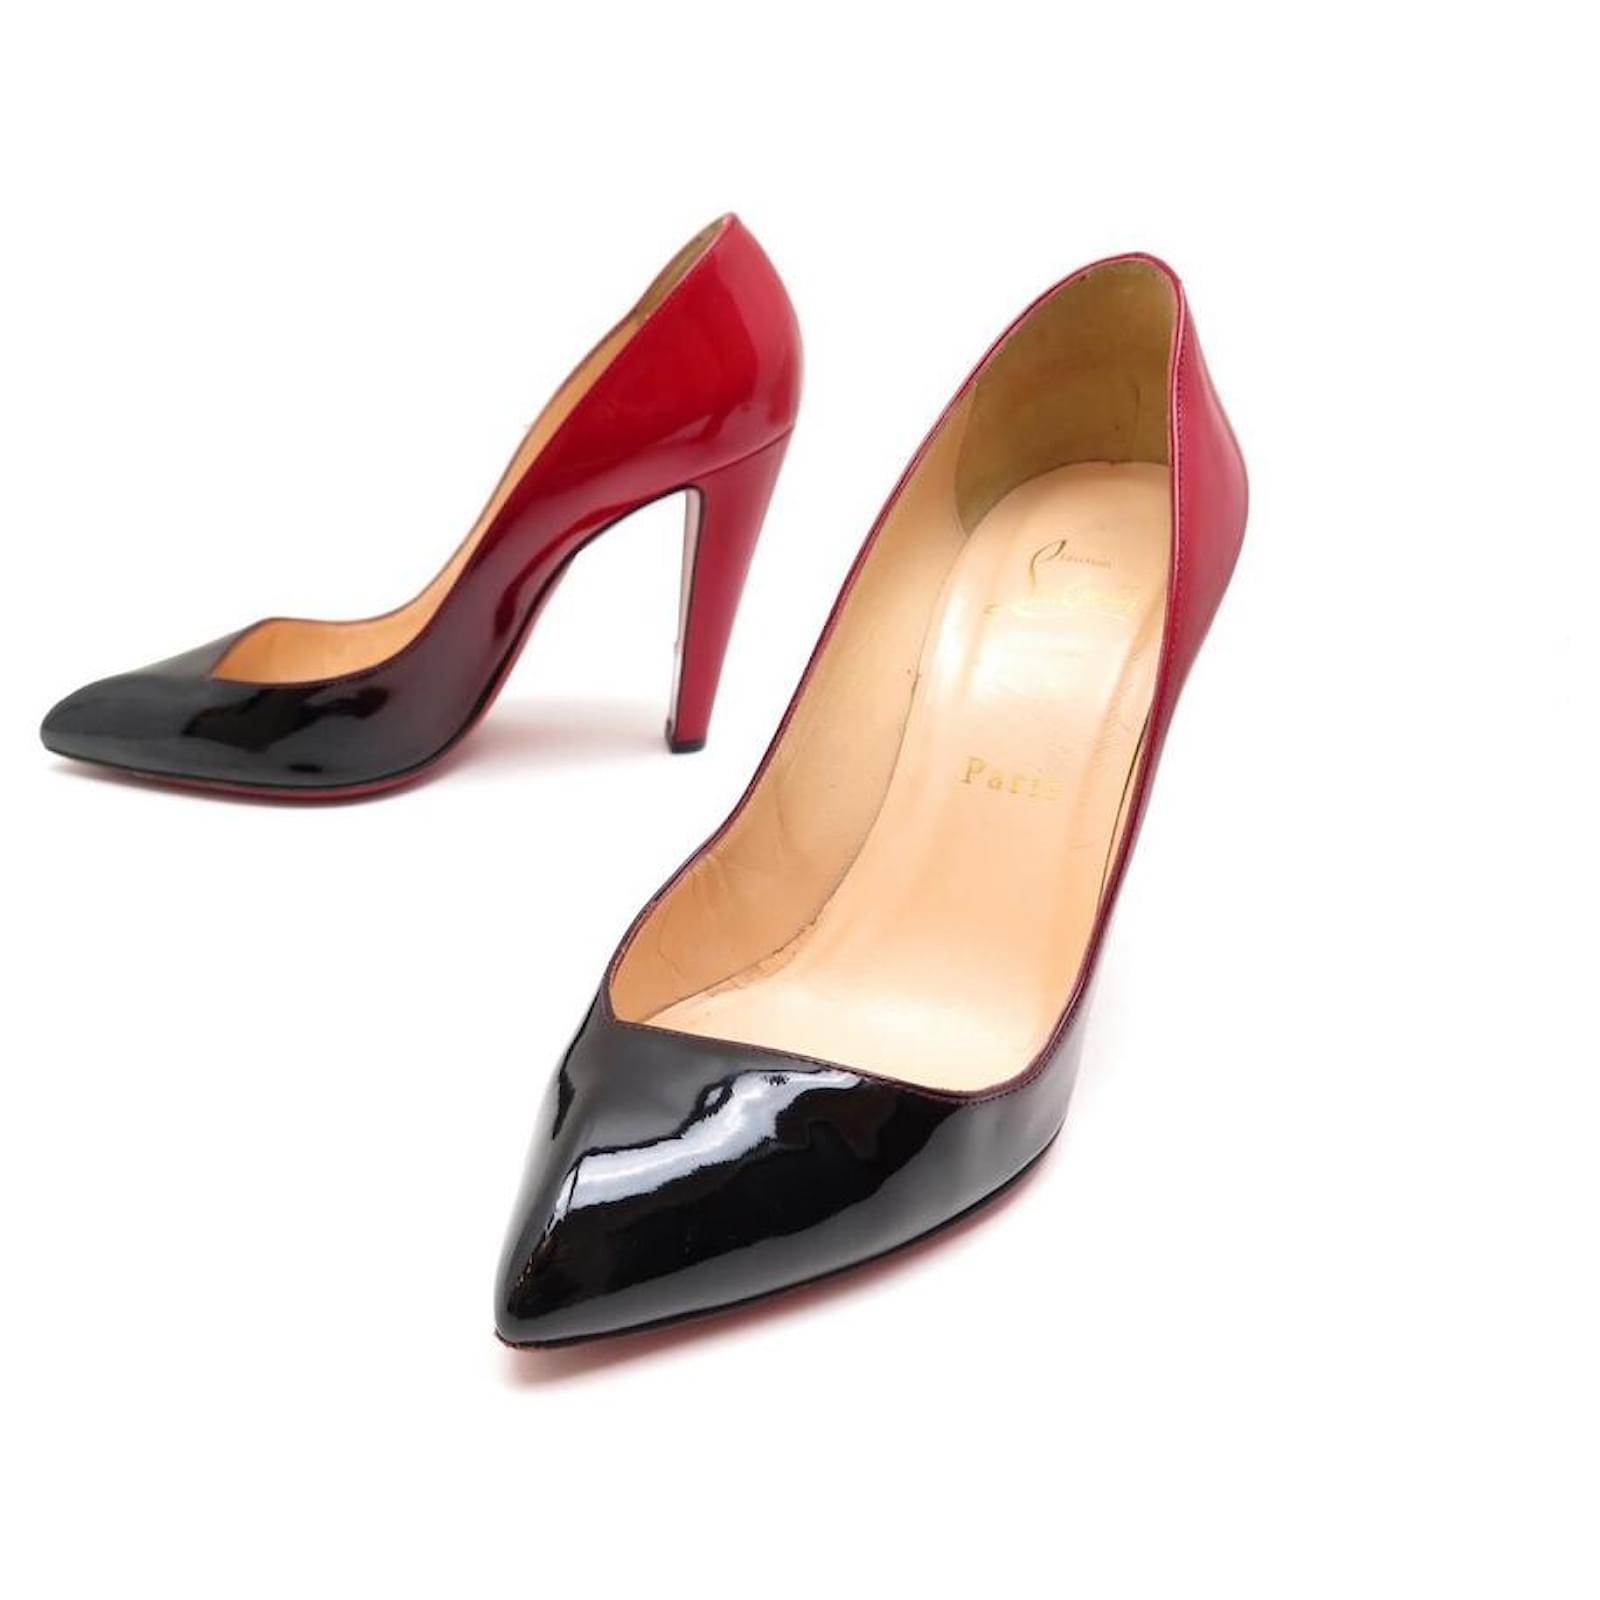 CHRISTIAN LOUBOUTIN SHOES CORNEILLE PUMPS 38 TWO-TONE PATENT LEATHER ref.426592 pic